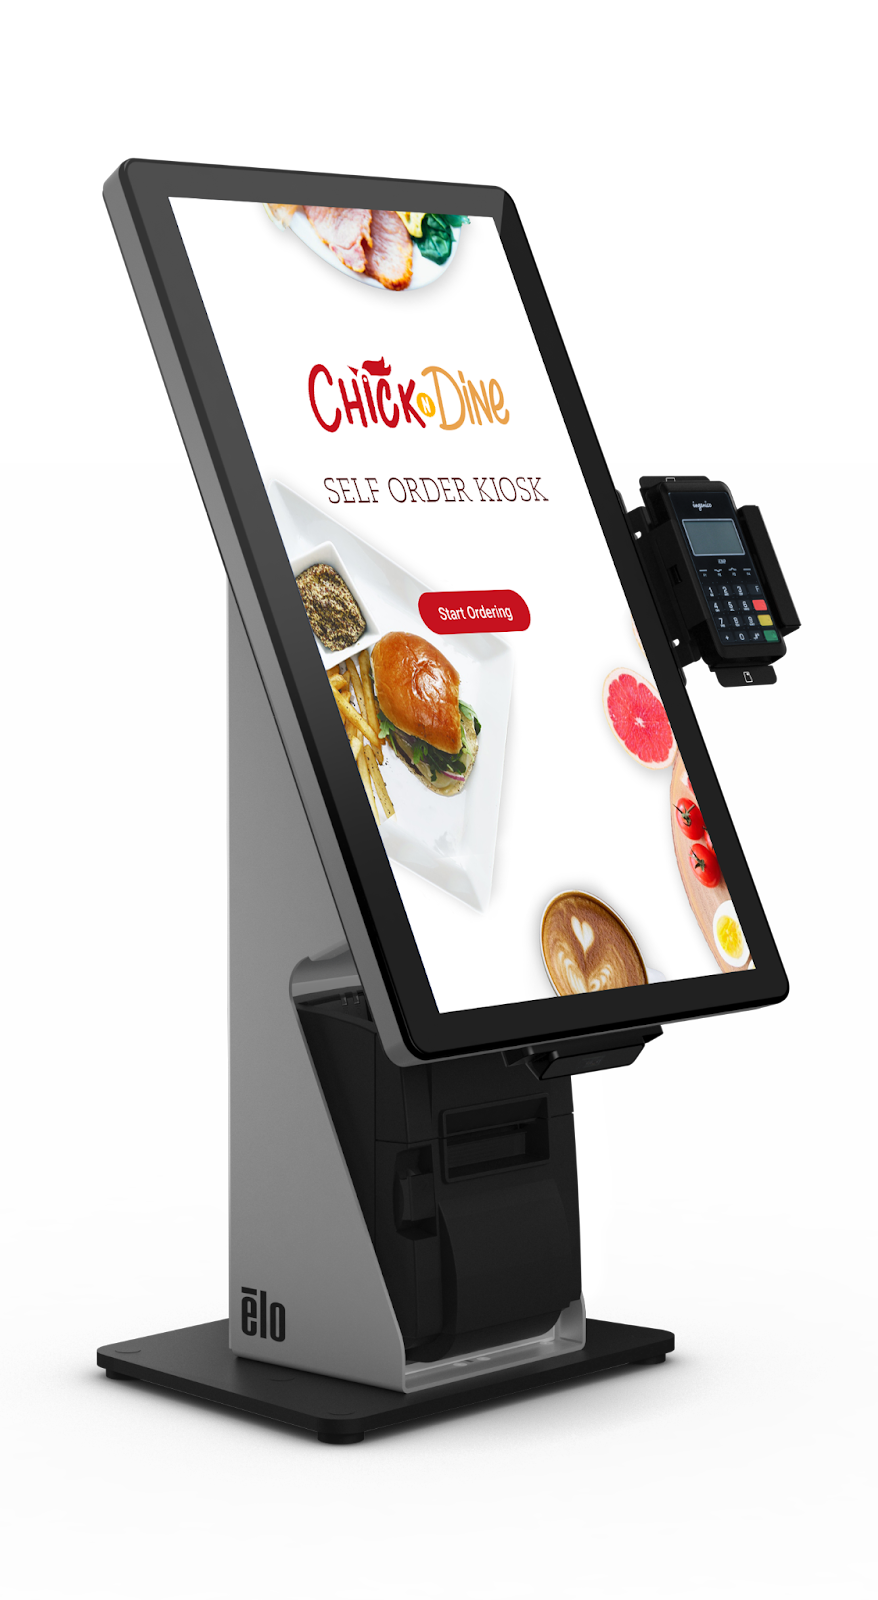 Self-Ordering Kiosks and POS Systems Work Together to Streamline 1 - Applova